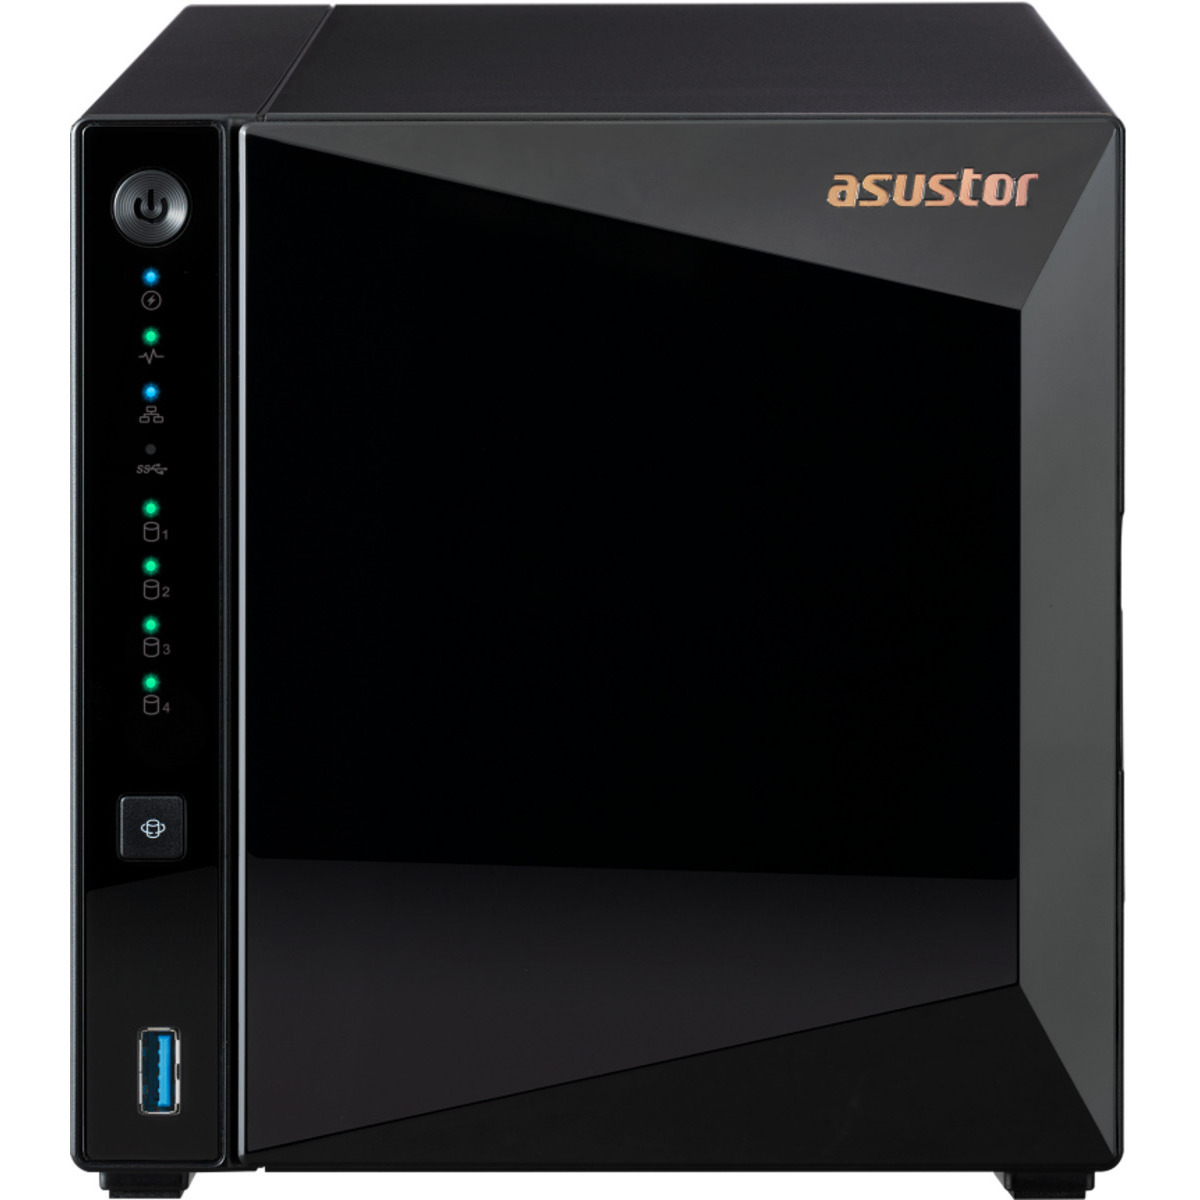 ASUSTOR DRIVESTOR 4 Pro Gen2 AS3304T v2 32tb 4-Bay Desktop Personal / Basic Home / Small Office NAS - Network Attached Storage Device 4x8tb Western Digital Red Plus WD80EFPX 3.5 7200rpm SATA 6Gb/s HDD NAS Class Drives Installed - Burn-In Tested - ON SALE DRIVESTOR 4 Pro Gen2 AS3304T v2